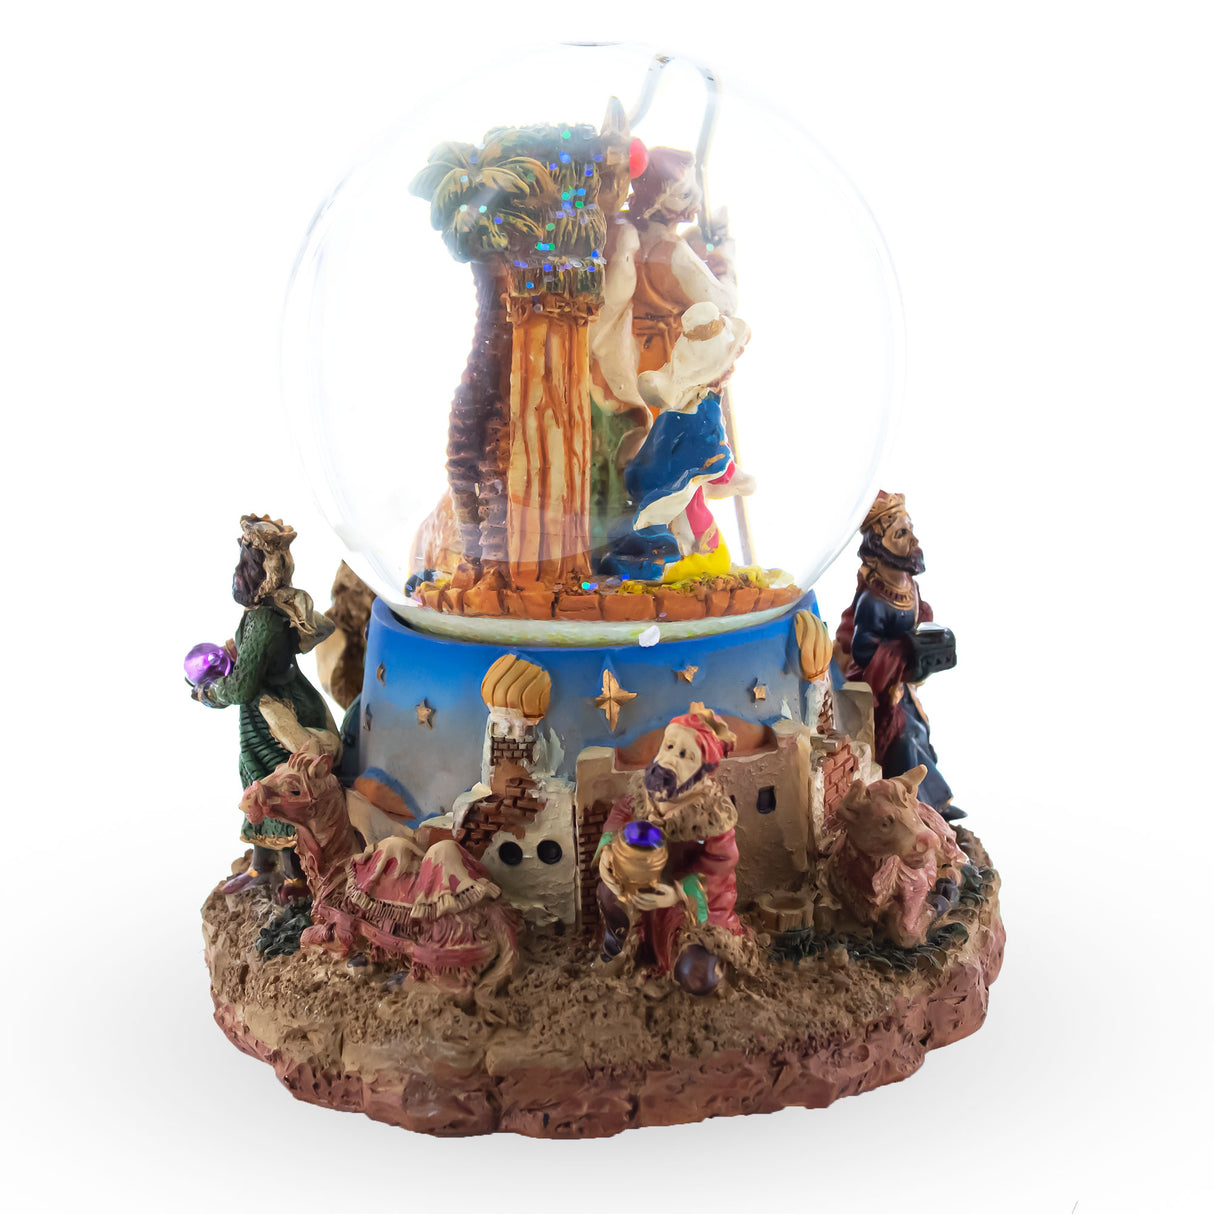 Regal Gift Bearers: Nativity Scene Musical Water Snow Globe with Kings ,dimensions in inches: 5 x 4.25 x 4.25